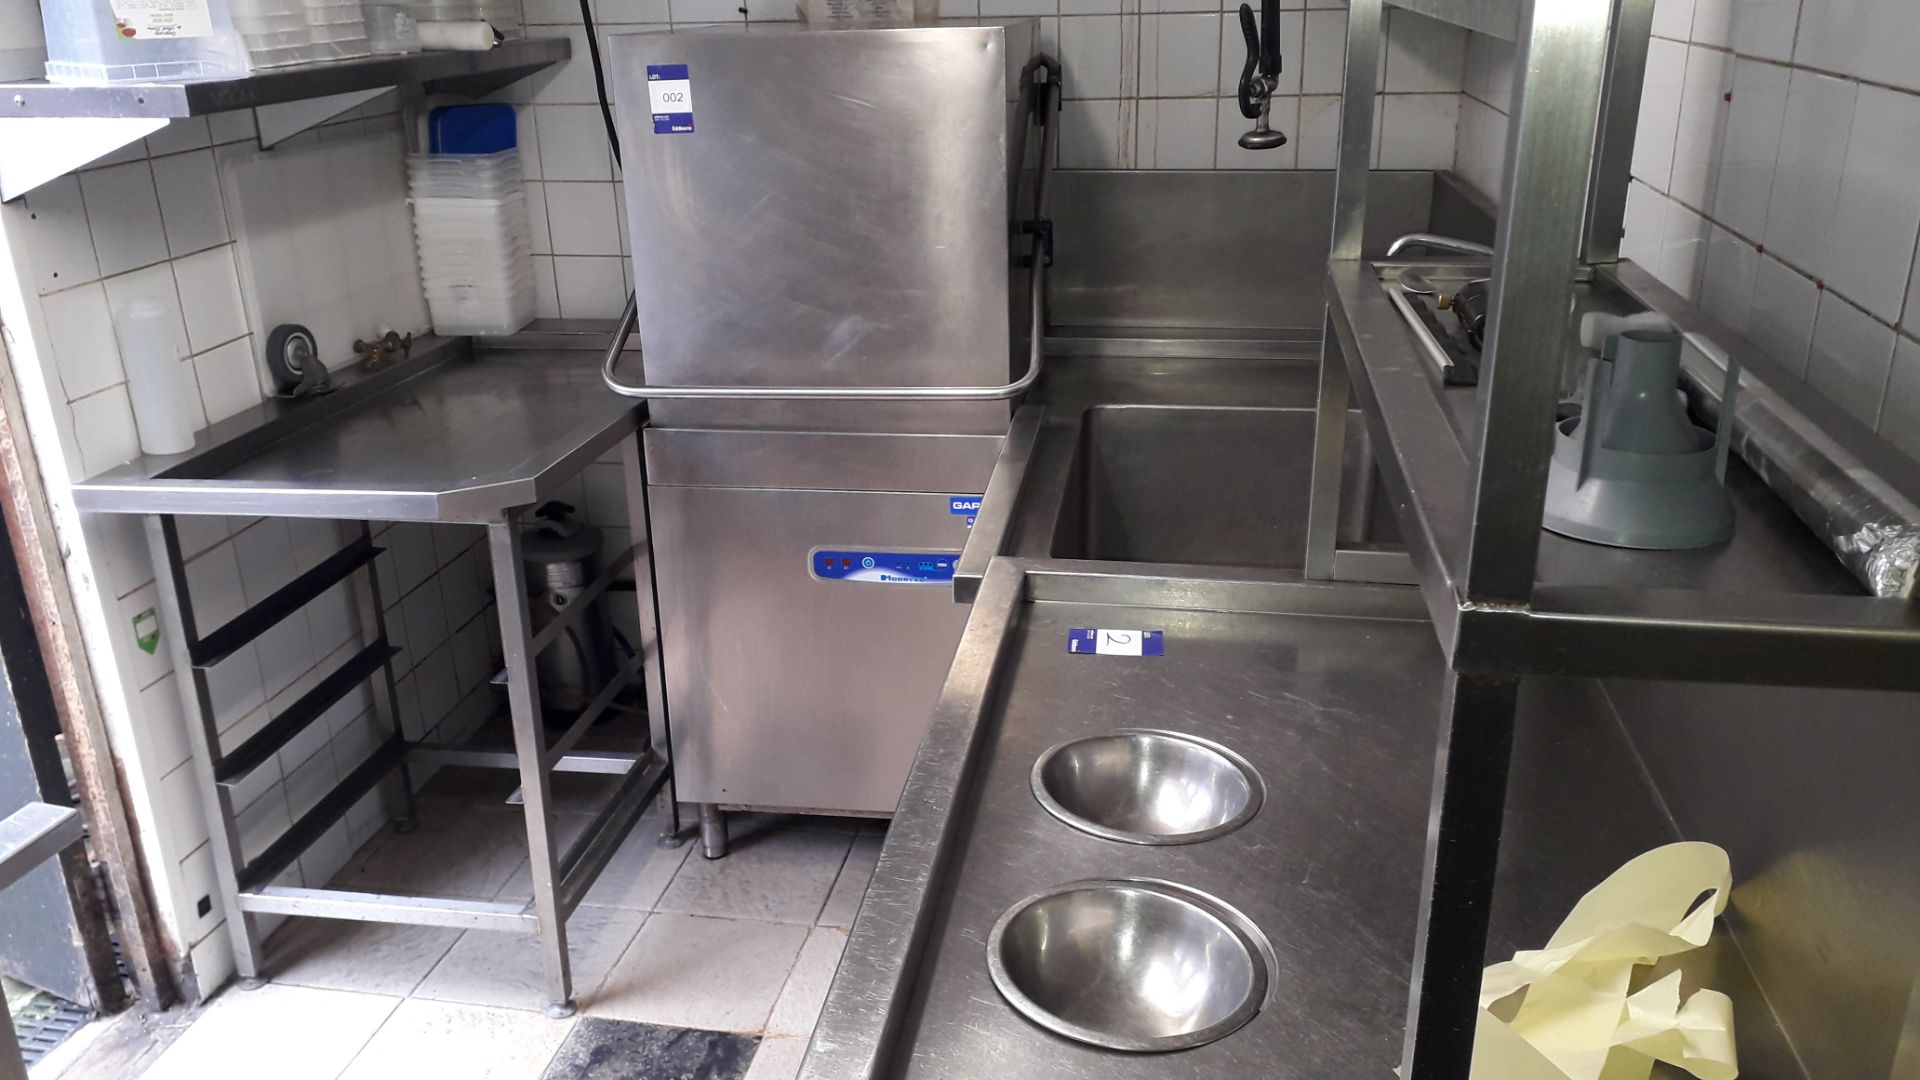 Hoonved CAP7E11 Pass Through Dishwasher Serial Number GB1803890318 with Feed Table, fitted Sink with